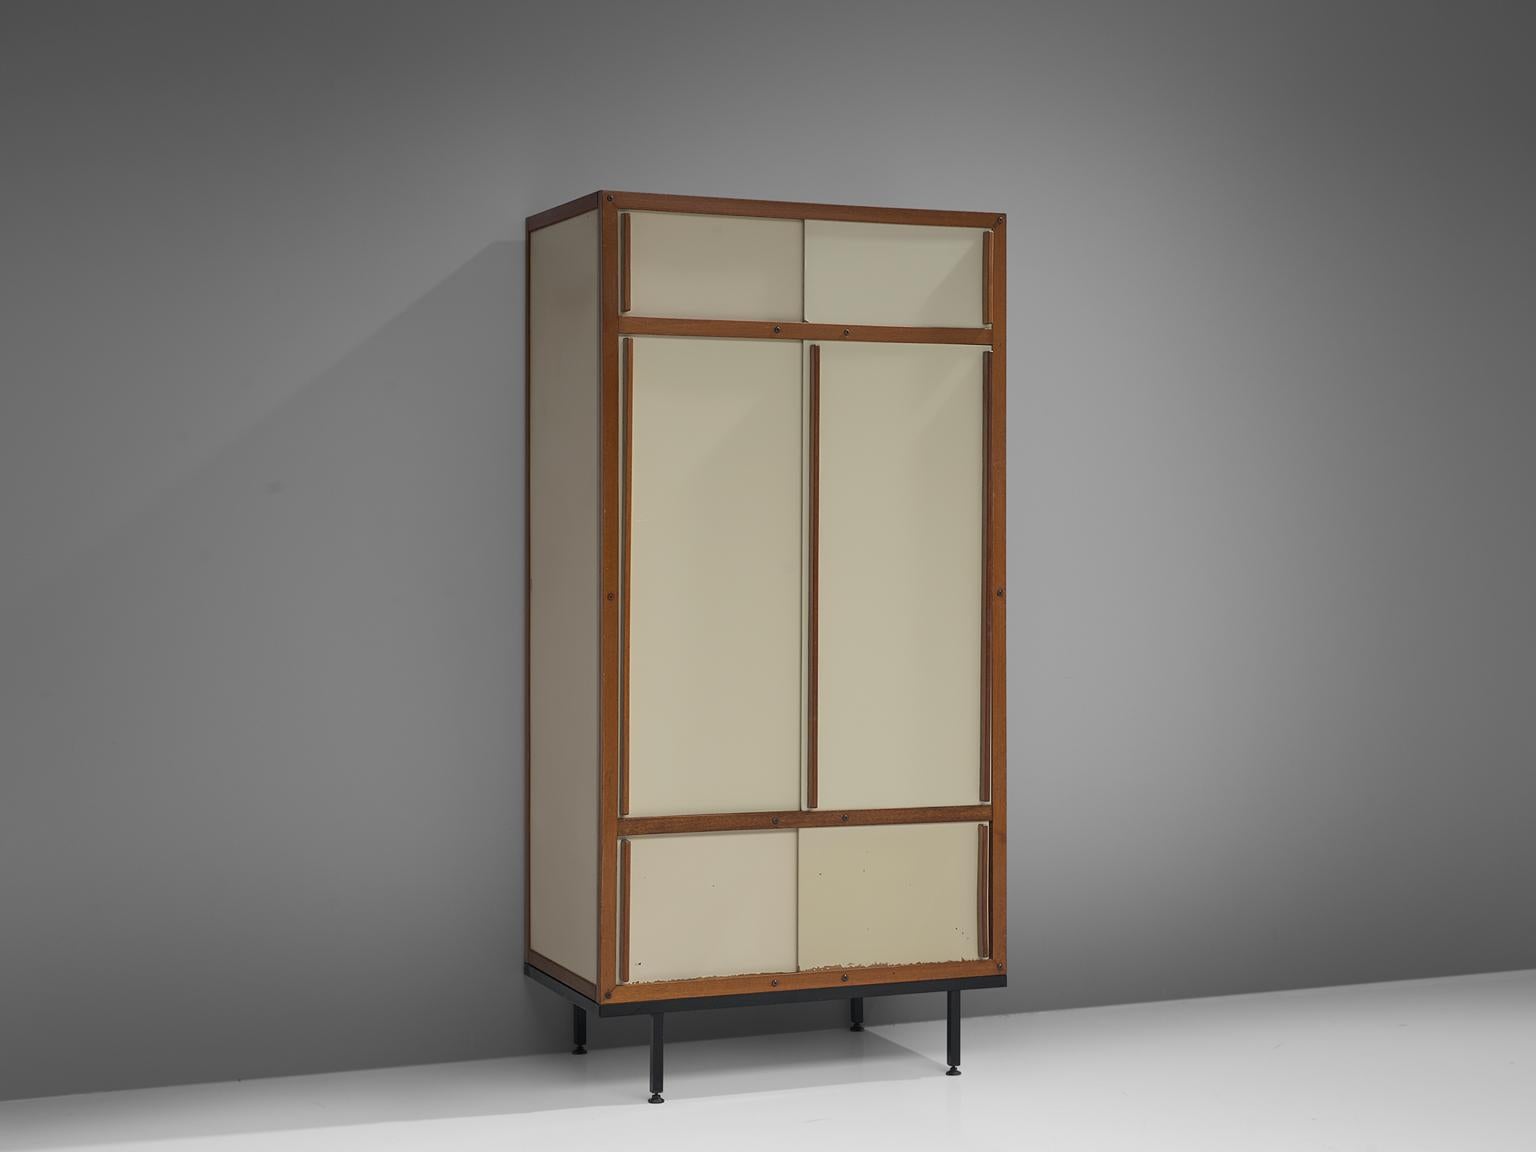 André Sornay for Atelier Sornay, cabinet, Honduras mahogany and metal, France, c. 1960.

French Mid-Century modernist armoire by the avant garde creator André Sornay. The wooden front panels form a dynamic geometric abstraction in cream planes,